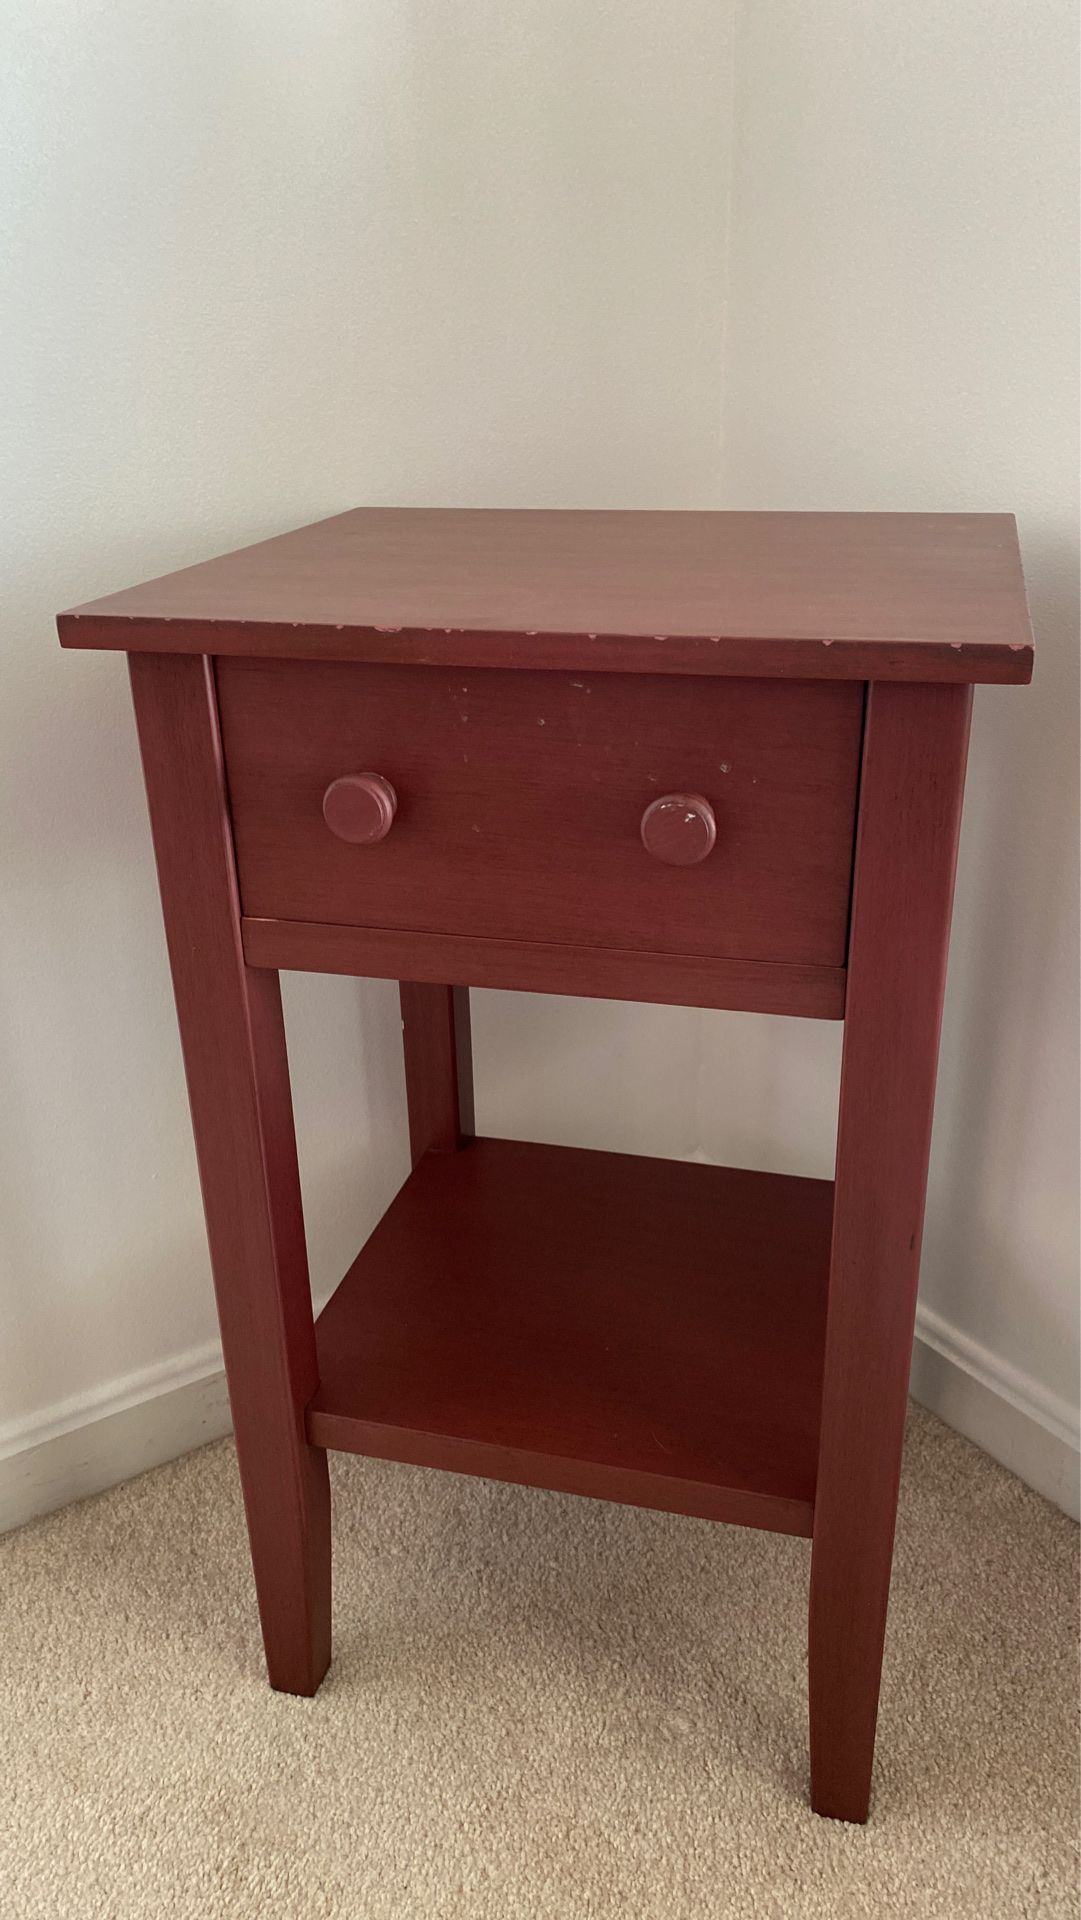 Simple end table